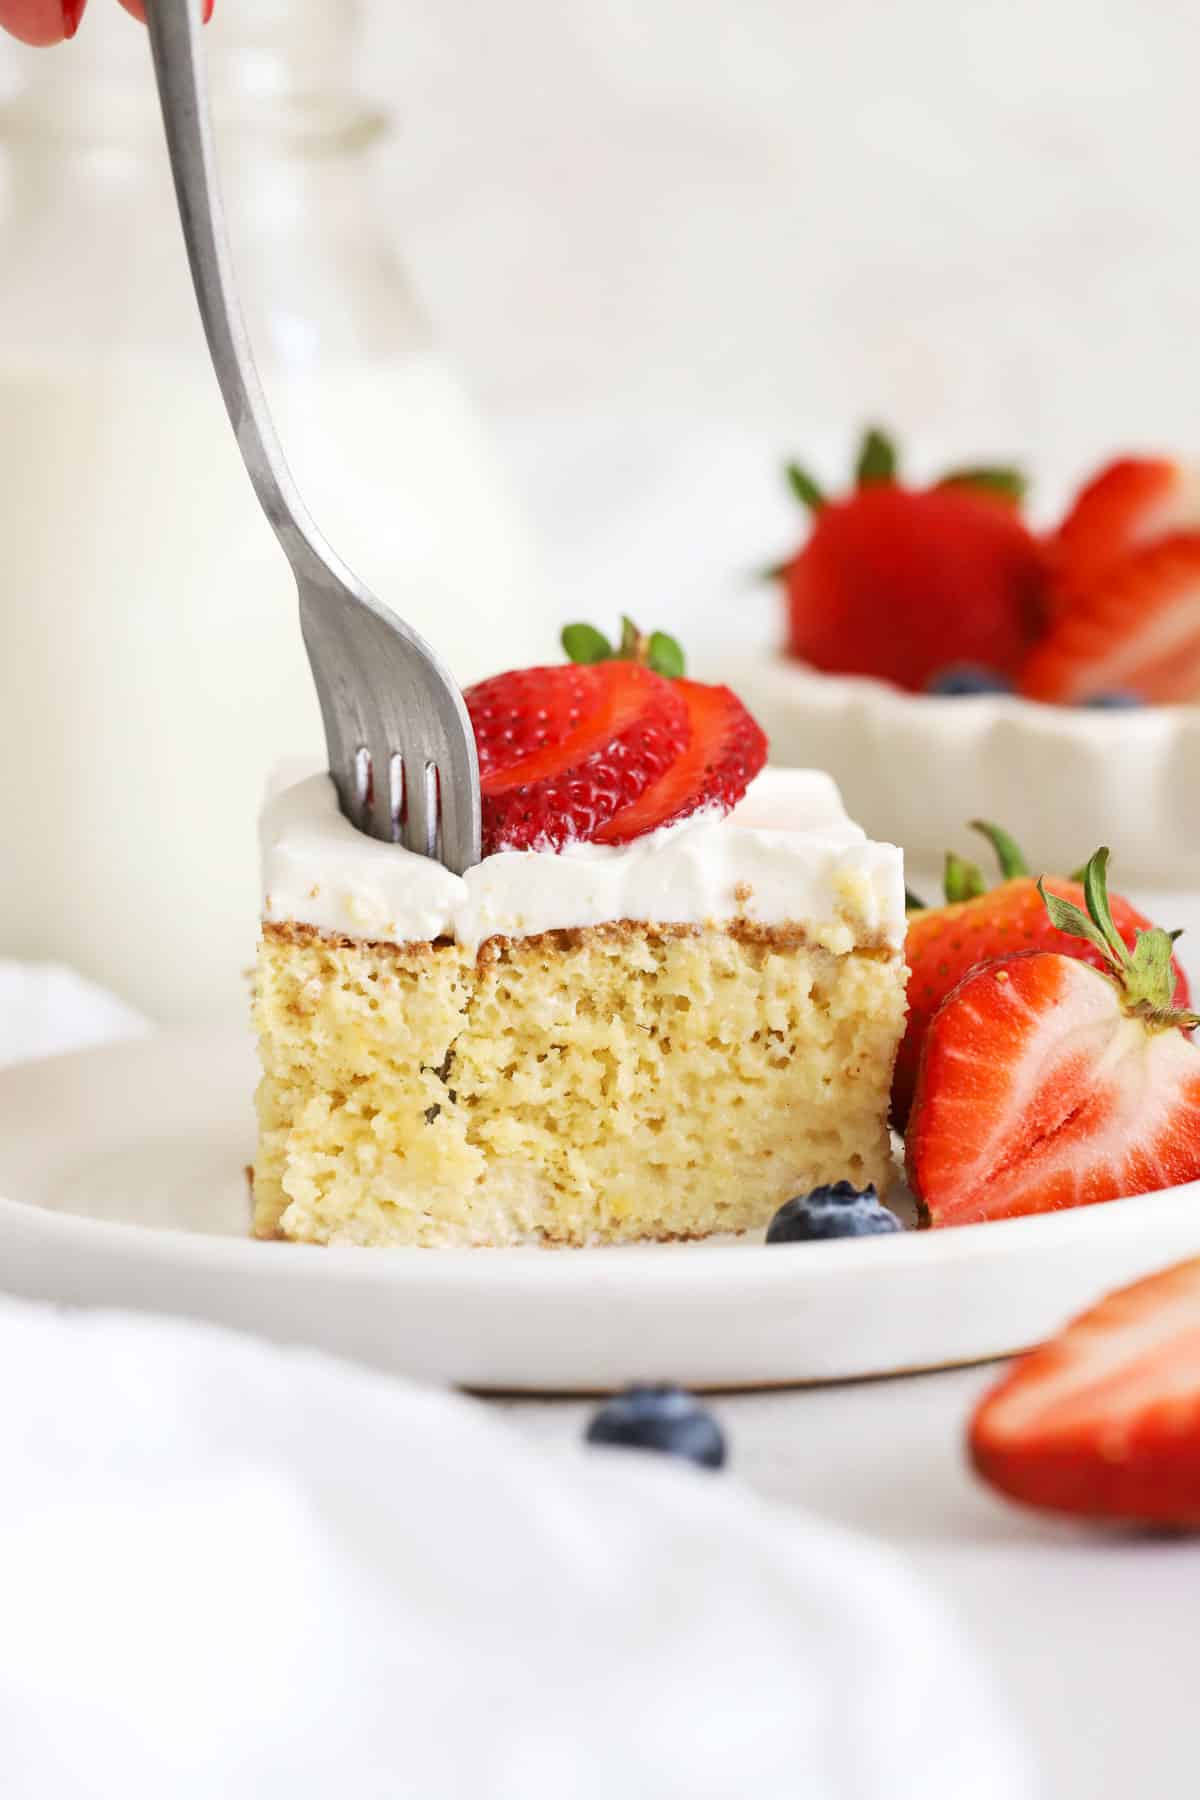 Let's make Gluten-Free Tres Leches Cake! This easy sponge cake gets soaked in a sweet milk mixture and topped with fluffy whipped cream and fresh berries. It's delicious, classic, and SO EASY to make! If you've never had it before, it's basically the original poke cake recipe! This ultra-moist cake tastes sweet and creamy, with notes of vanilla in every bite. It's the perfect sweet dessert to pair with a Mexican dinner or serve for a Cinco de Mayo celebration. 